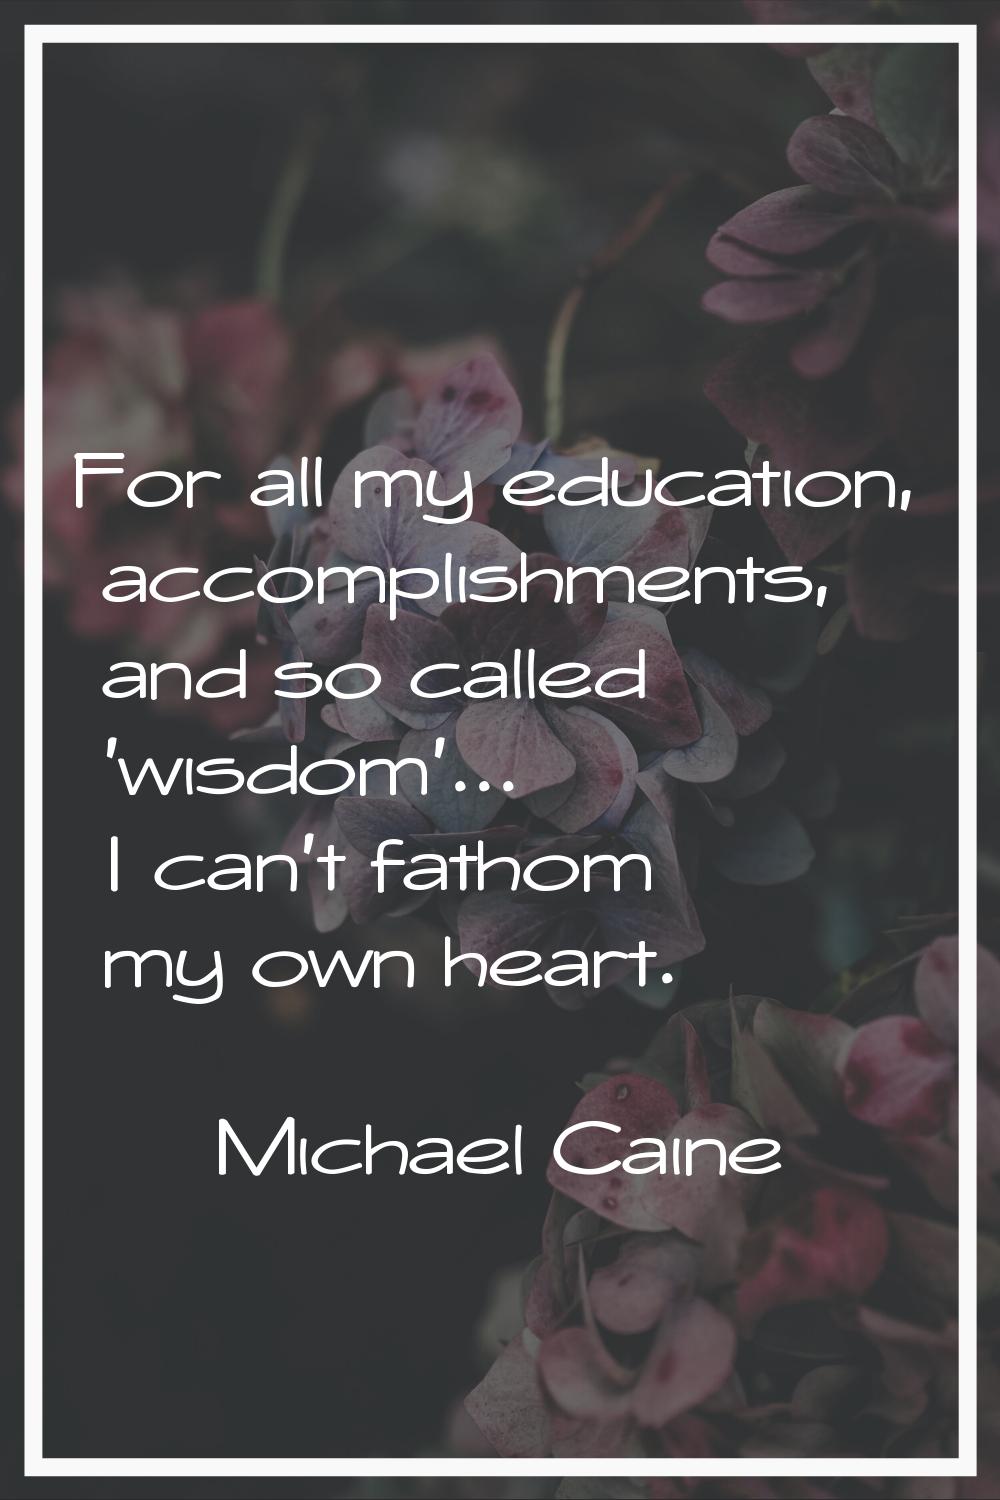 For all my education, accomplishments, and so called 'wisdom'... I can't fathom my own heart.